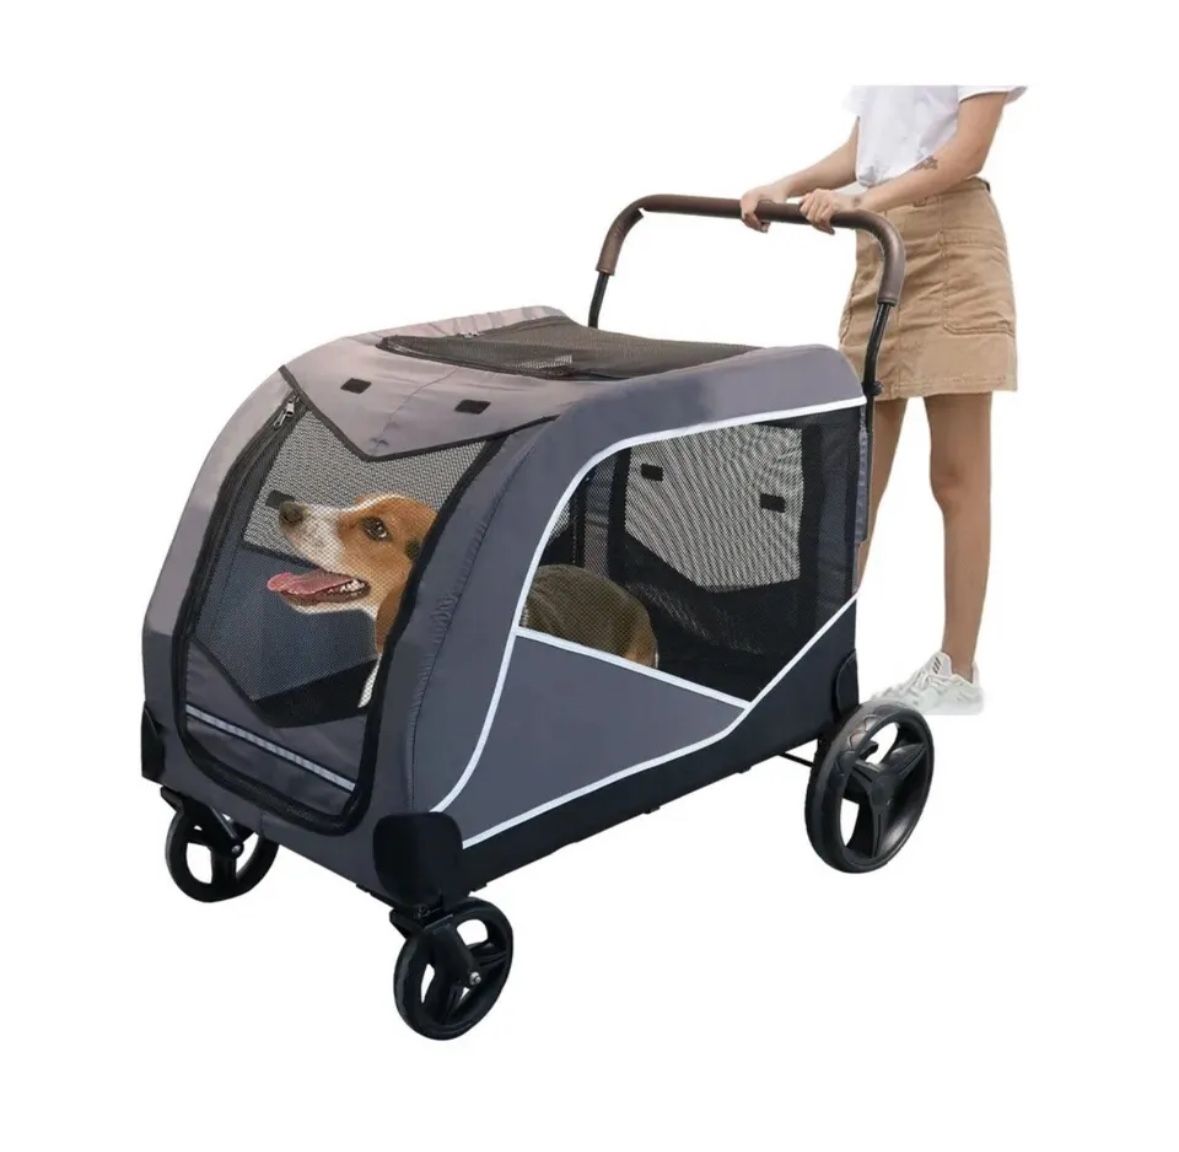 Goyappin Dog Stroller for Large Dogs - Holds 160 Lbs